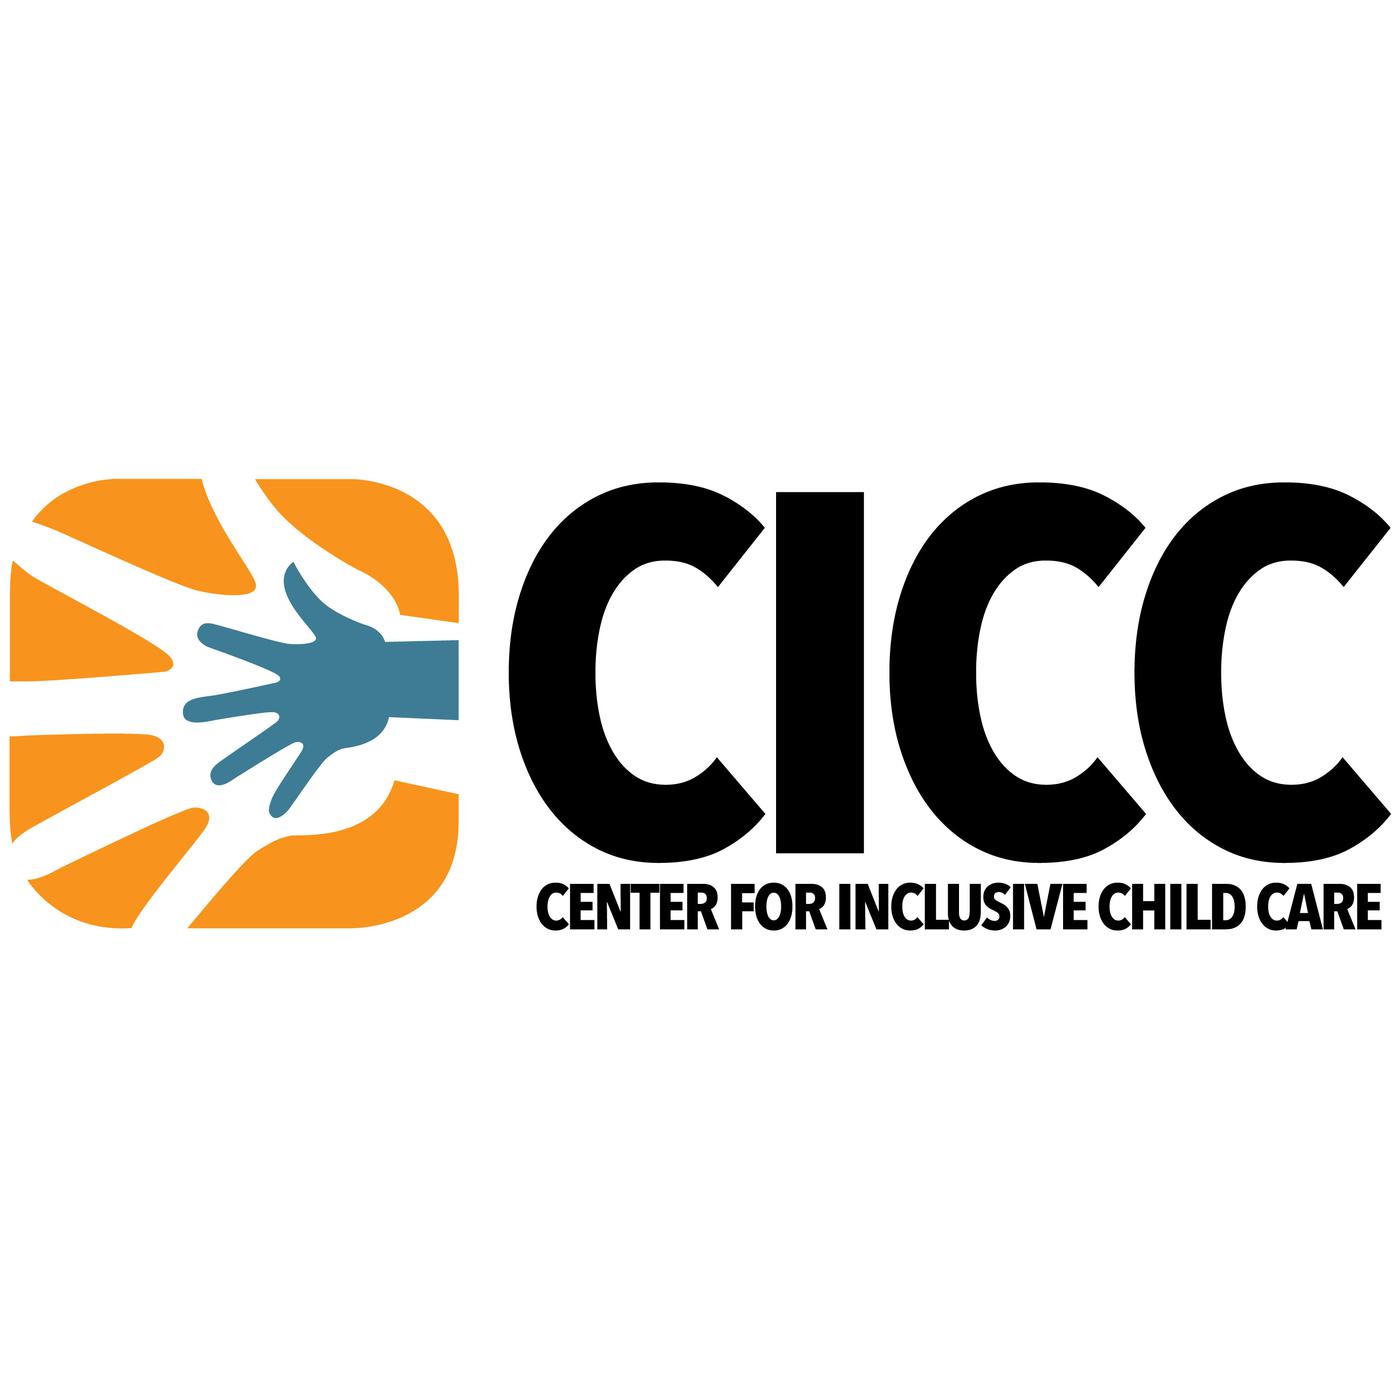 Center for Inclusive Child Care Logo. Large hand with a smaller hand inside.